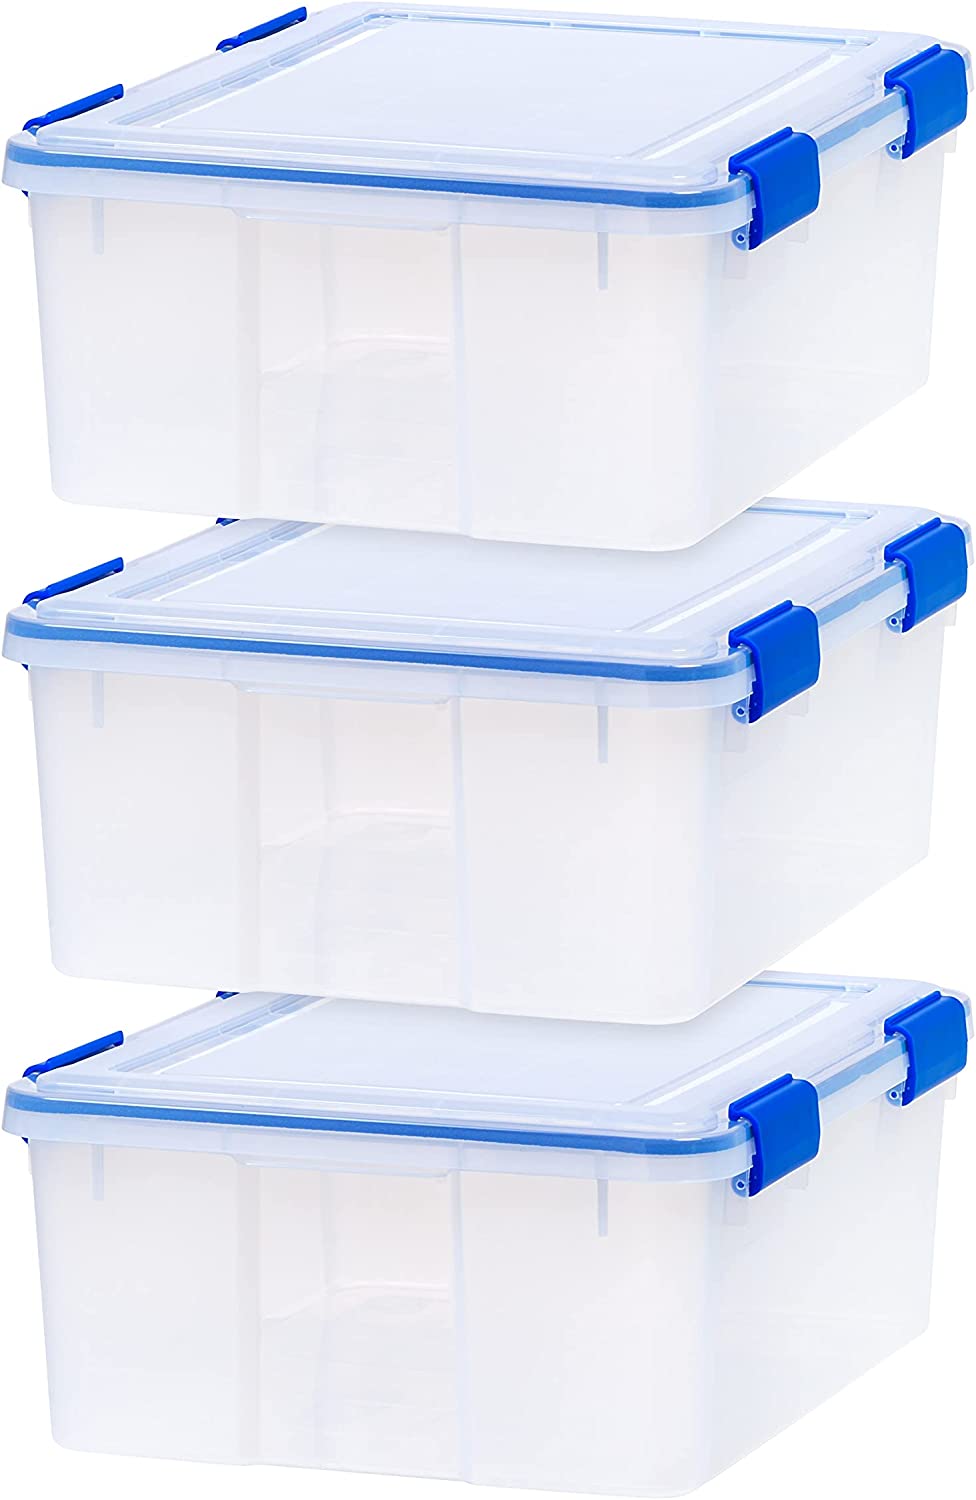 https://bigbigmart.com/wp-content/uploads/2023/06/IRIS-USA-30-Quart-WEATHERPRO-Plastic-Storage-Box-with-Durable-Lid-and-Seal-and-Secure-Latching-Buckles-Clear-With-Blue-Buckles-Weathertight-3-Pack-1.jpg